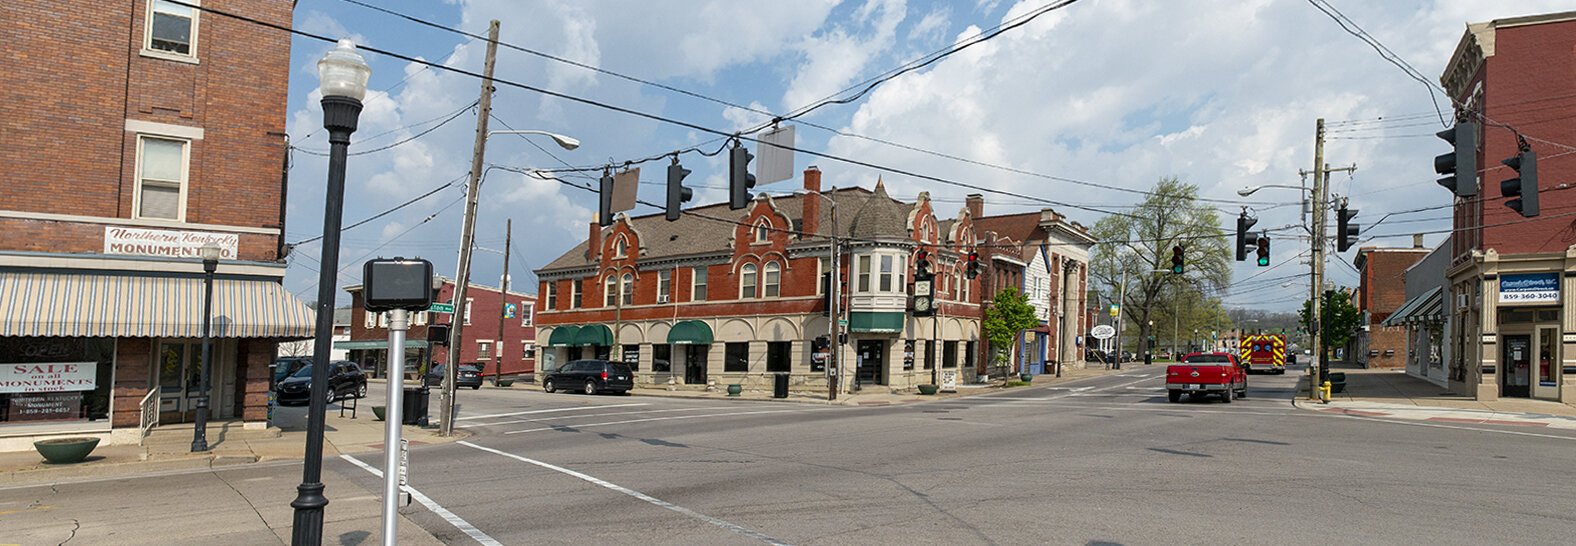 Ritte's Corner is the focal point of Latonia's revival.